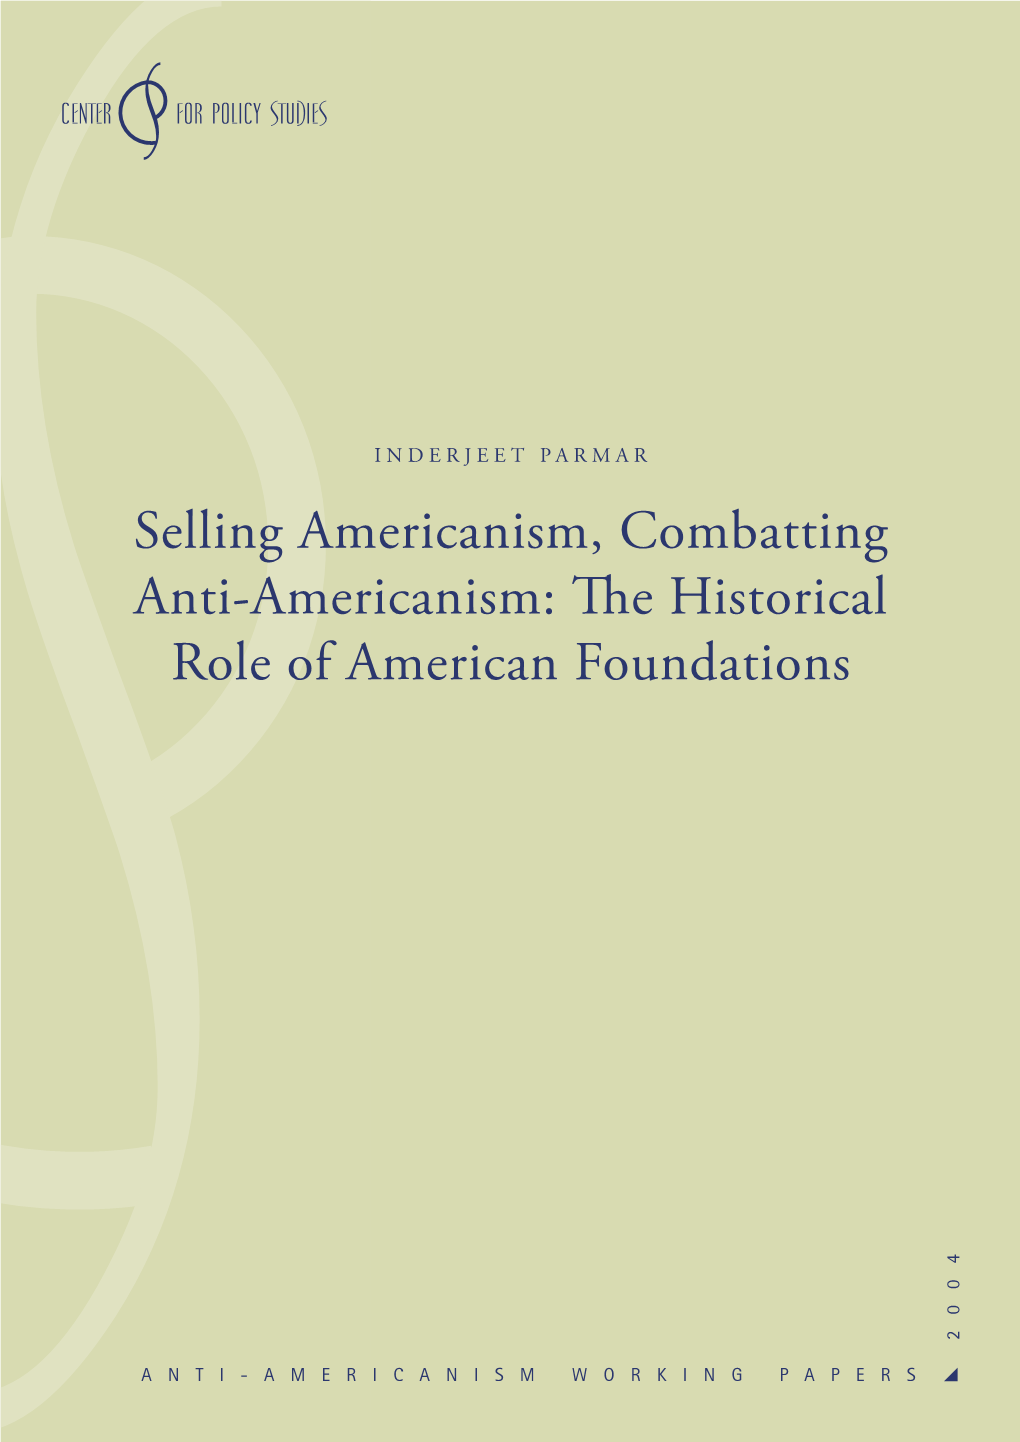 Selling Americanism, Combatting Anti-Americanism: the Historical Role of American Foundations 2 0 0 4